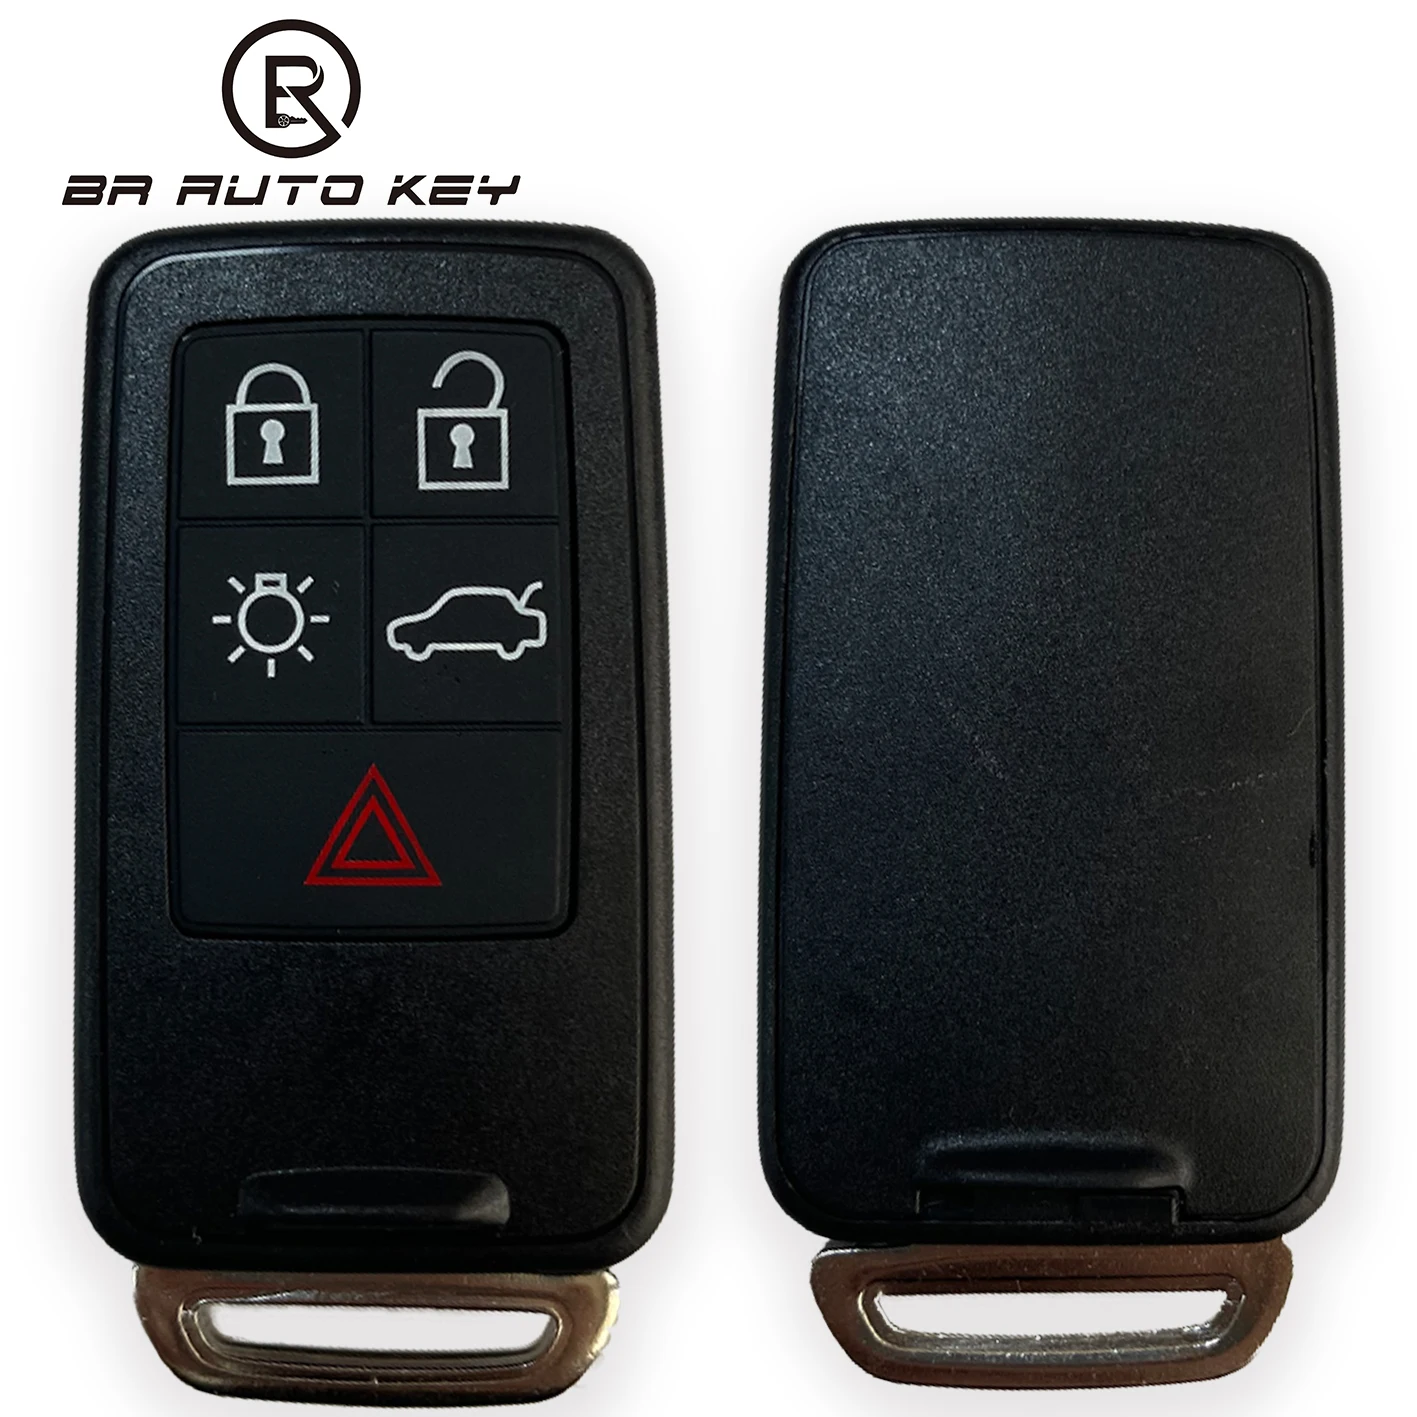 

Smart Remote Car Key Fob For Volvo XC60 S60 S60L V40 V60 S80 XC70 2010- 5 Buttons 433Mhz FSK ID46/7953 Chip KR55WK49264